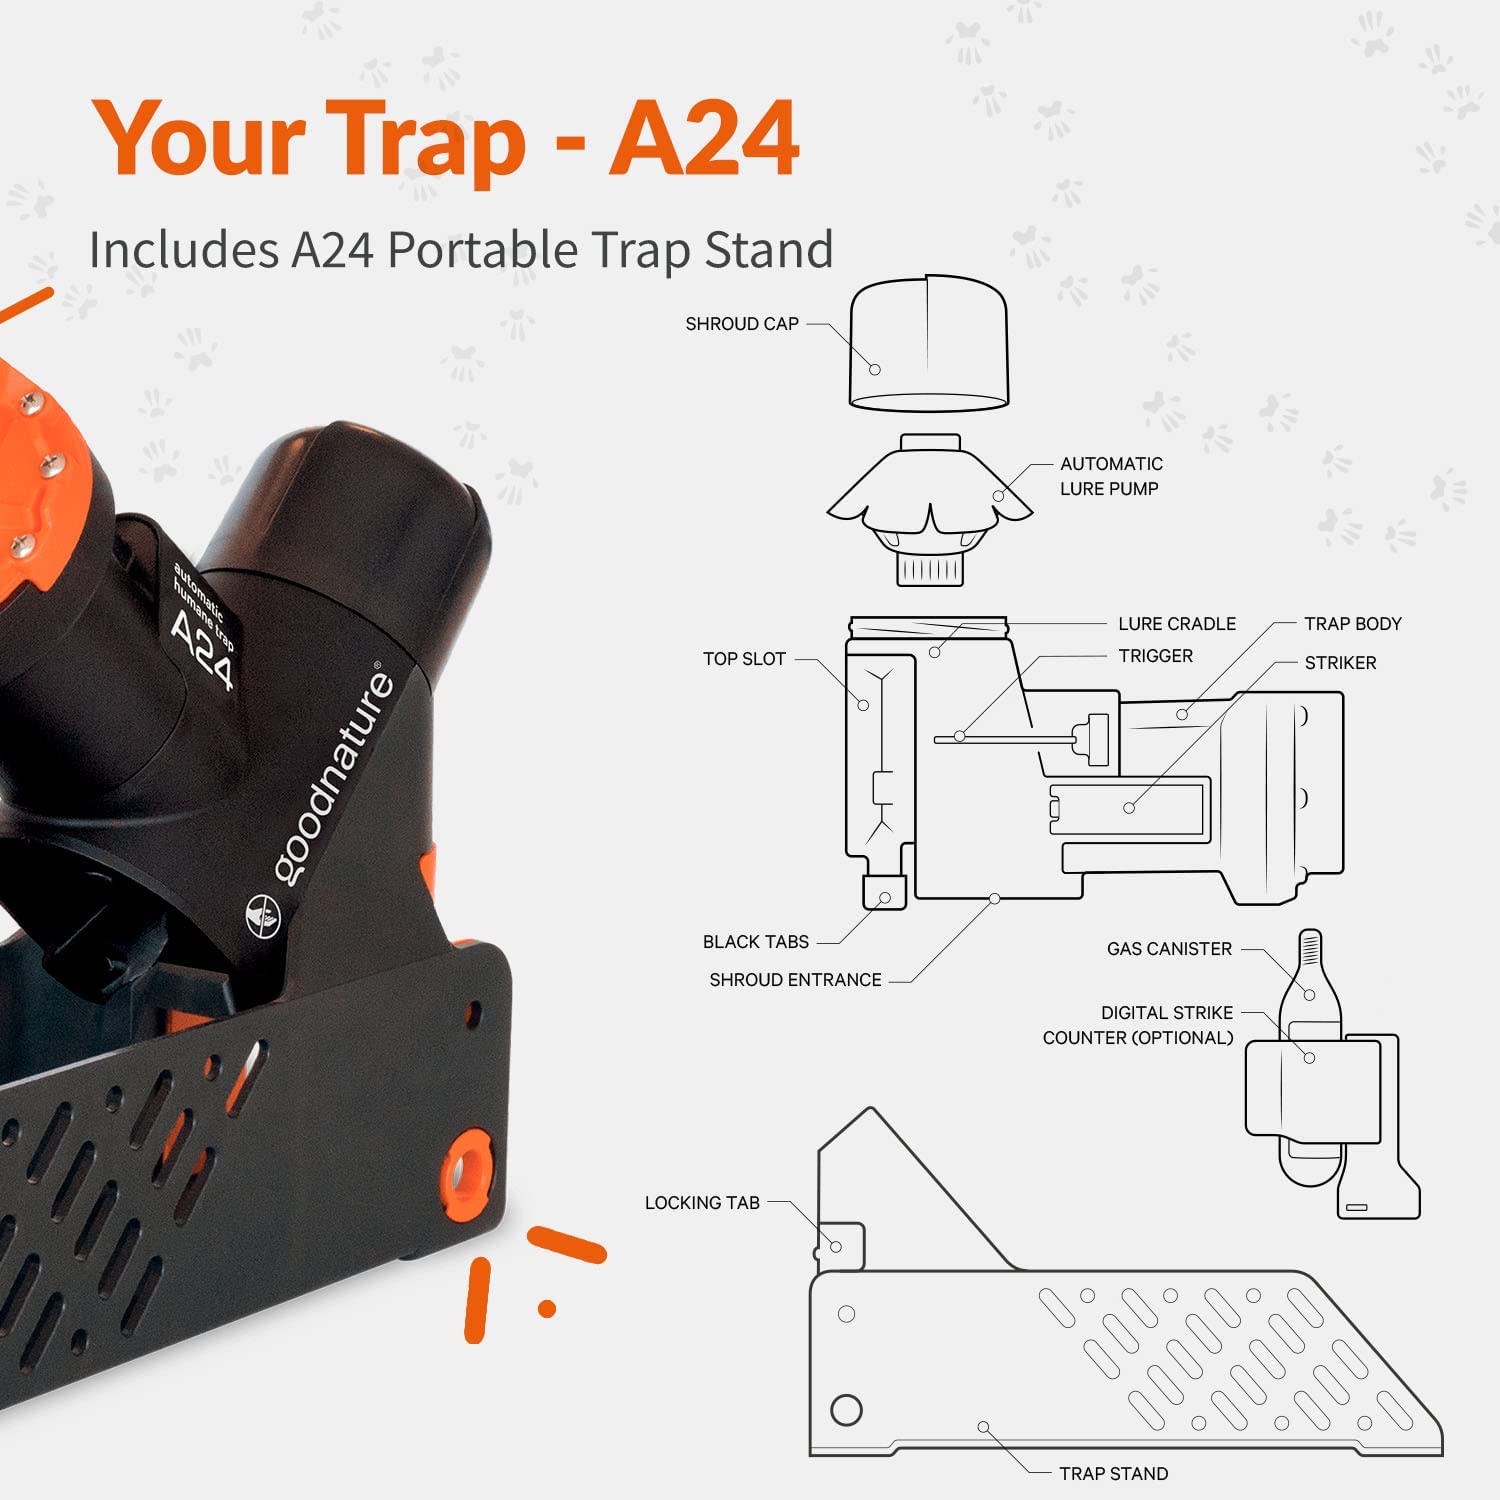  Goodnature A24 Home Outdoor Kit, Humane Rat & Mouse Trap with  Digital Strike Counter, Tree Mount, Automatic Paste Pump and CO2 Canister,  Pet-Friendly Mouse Trap, Best Rat Trap : Patio